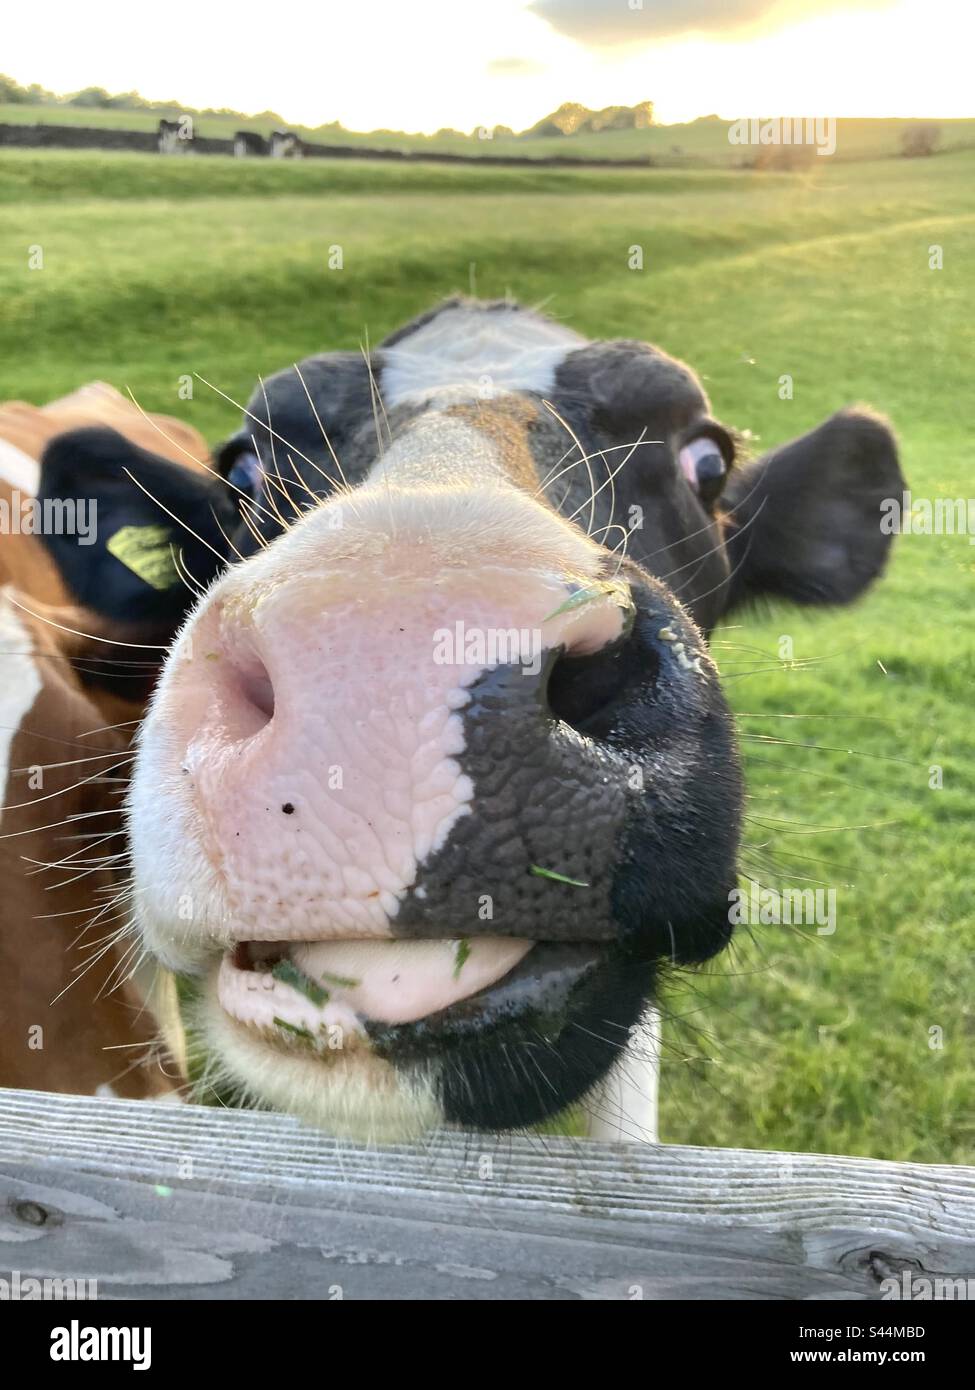 A smiling cow Stock Photo